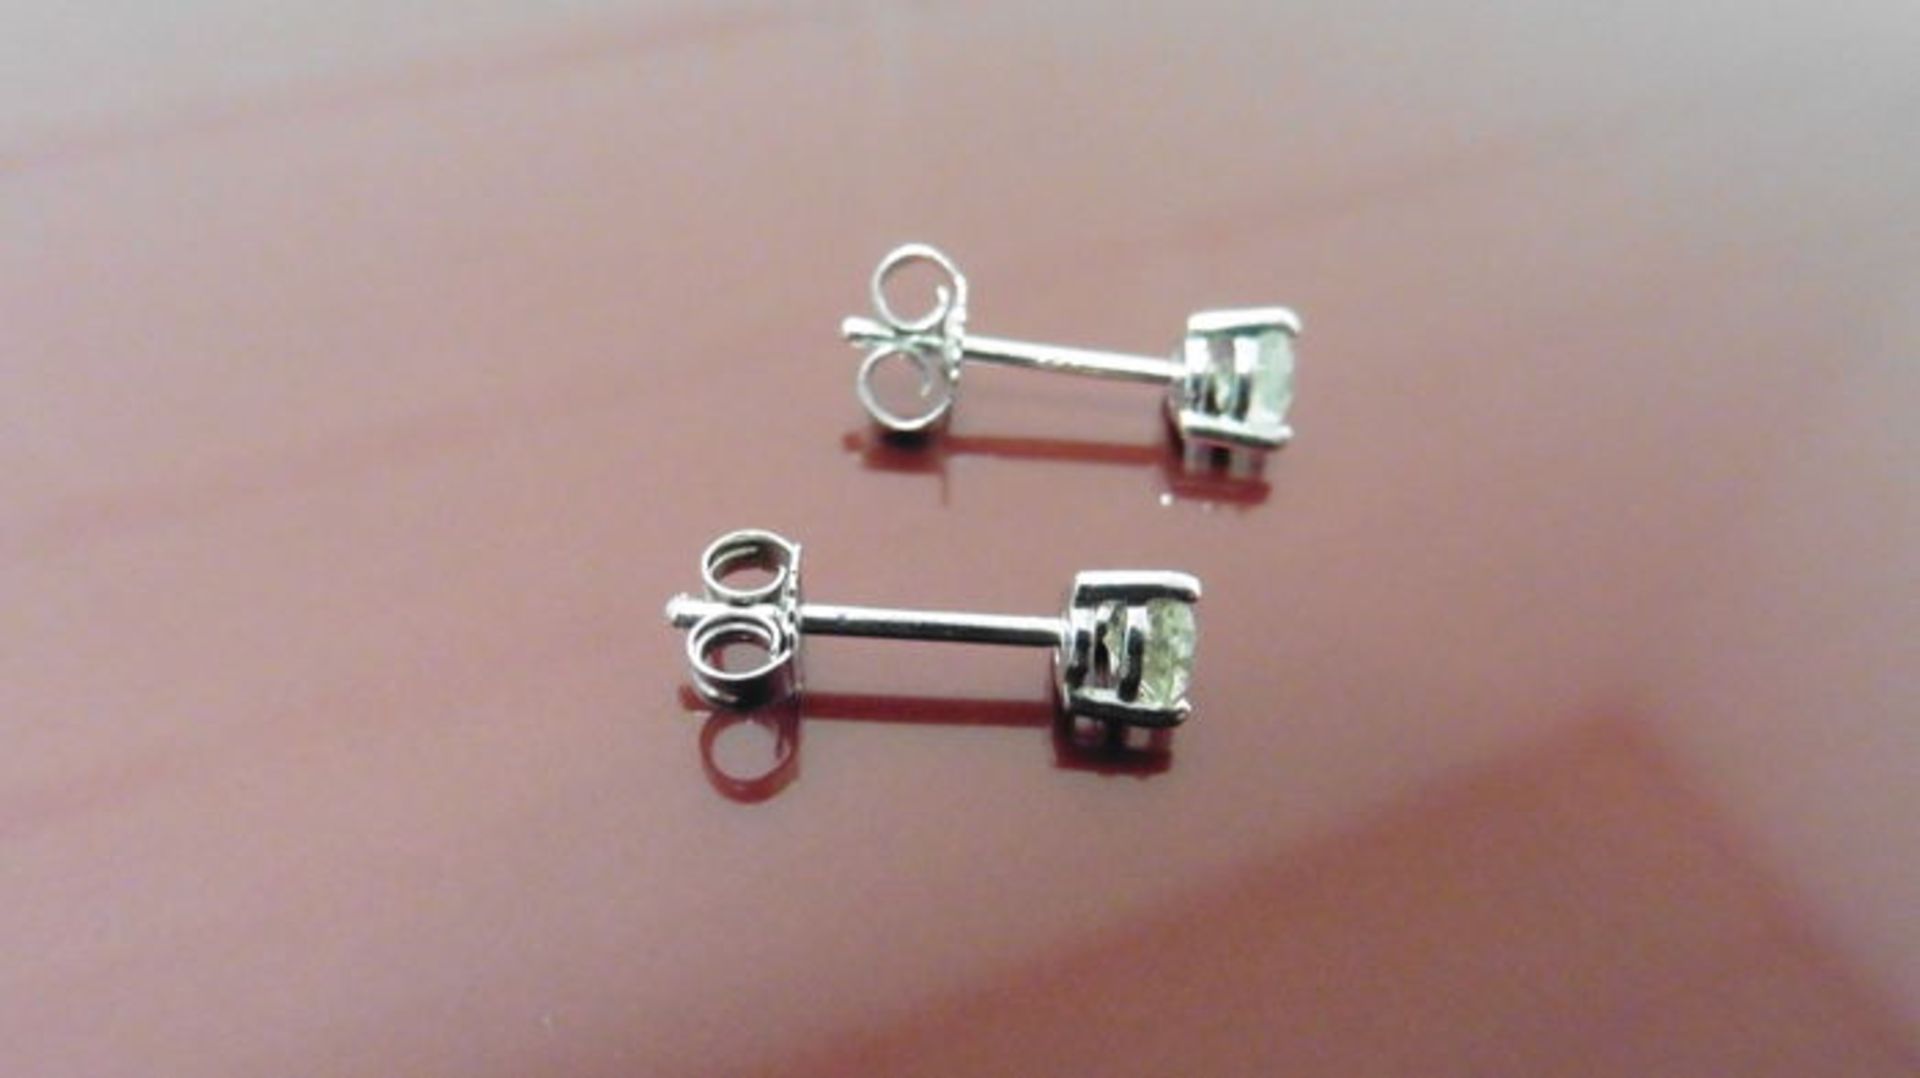 0.70ct diamond solitaire stud earrings set in platinum. I colour, si3 clarity. 3 claw setting with - Image 2 of 2